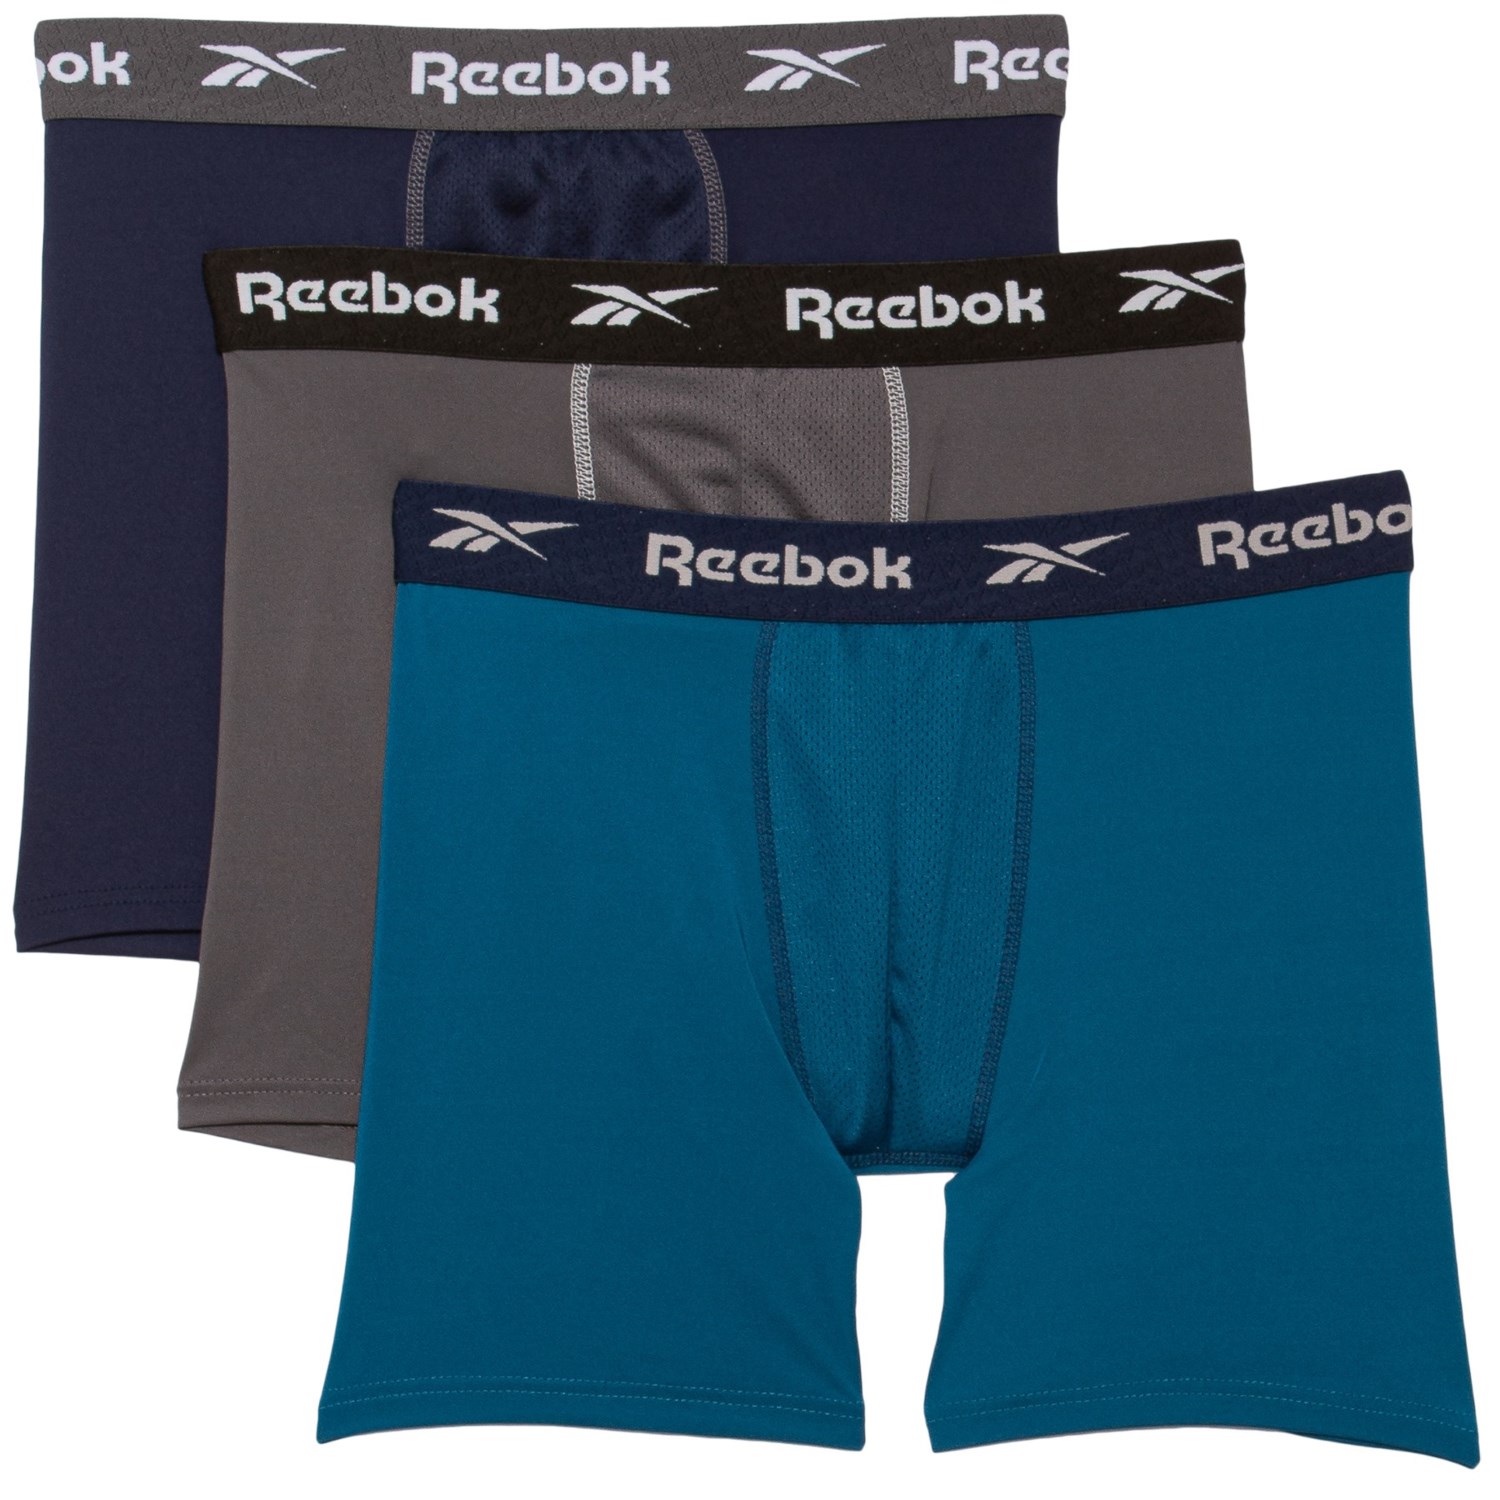 Reebok Cooling Stretch-Performance Boxer Briefs - 3-Pack - Save 50%